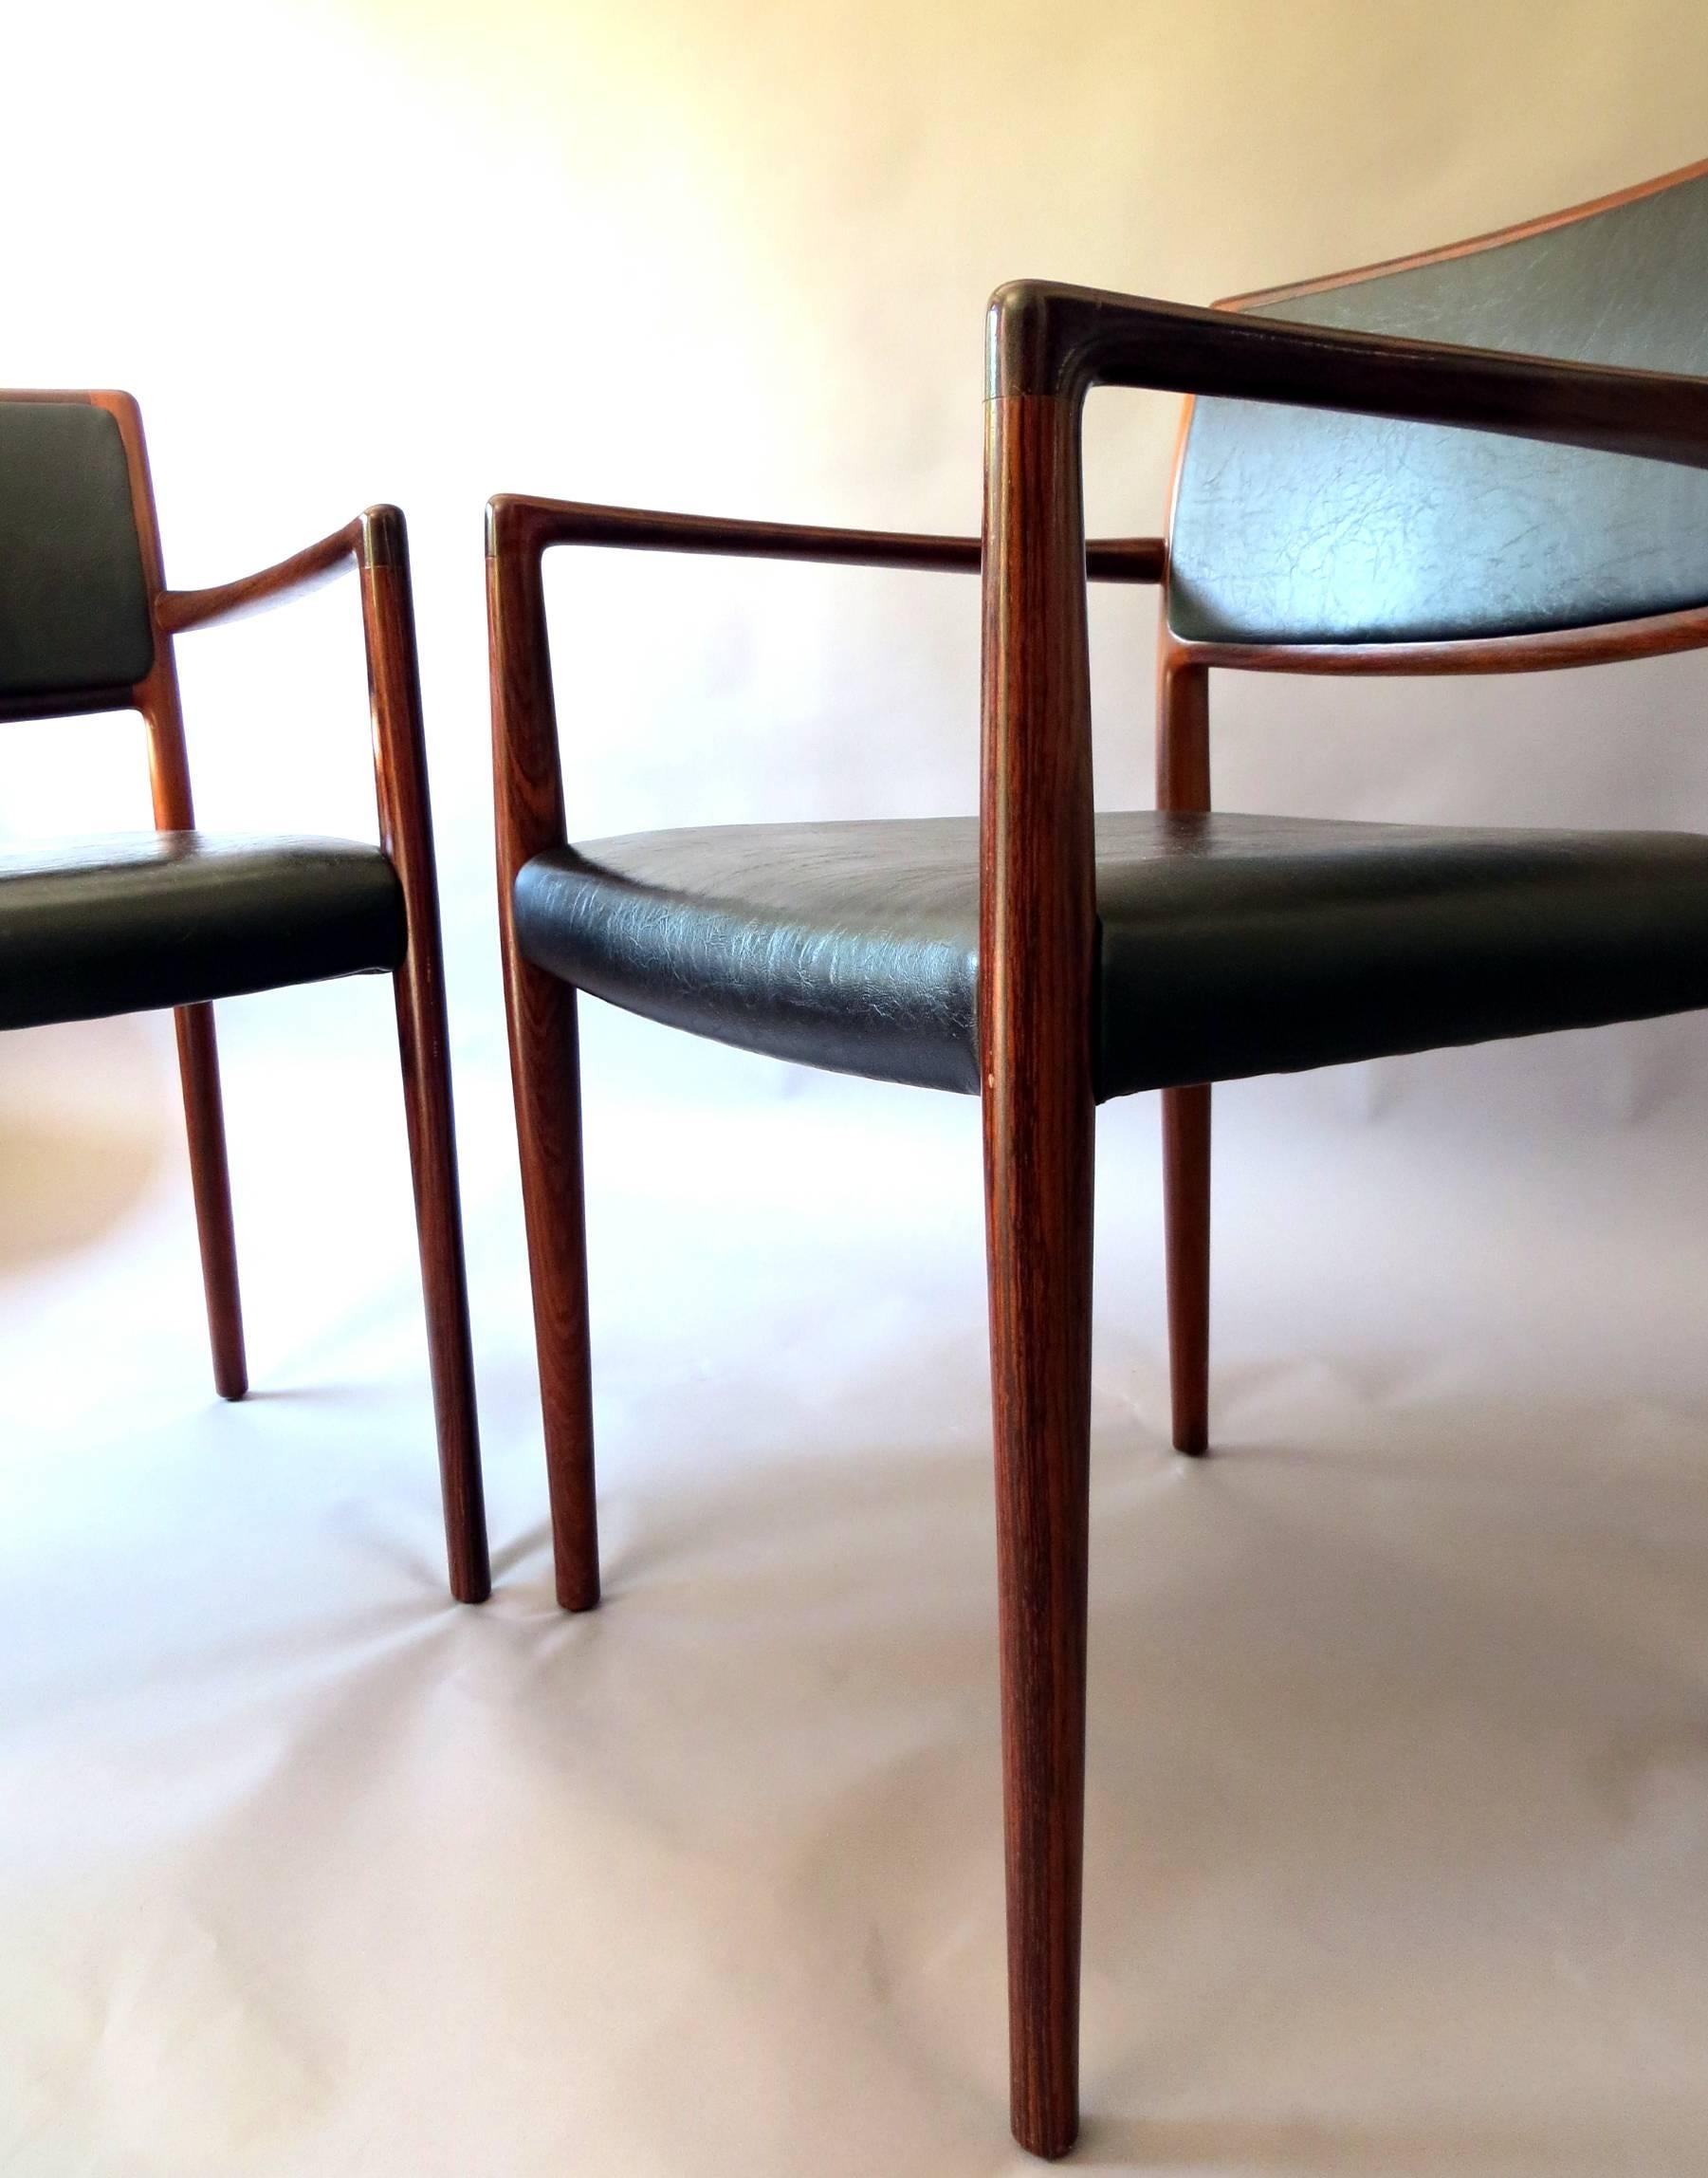 Danish Mid-Century Modern Rosewood and Leather Dining Chairs, Set of Two, 1960s For Sale 7